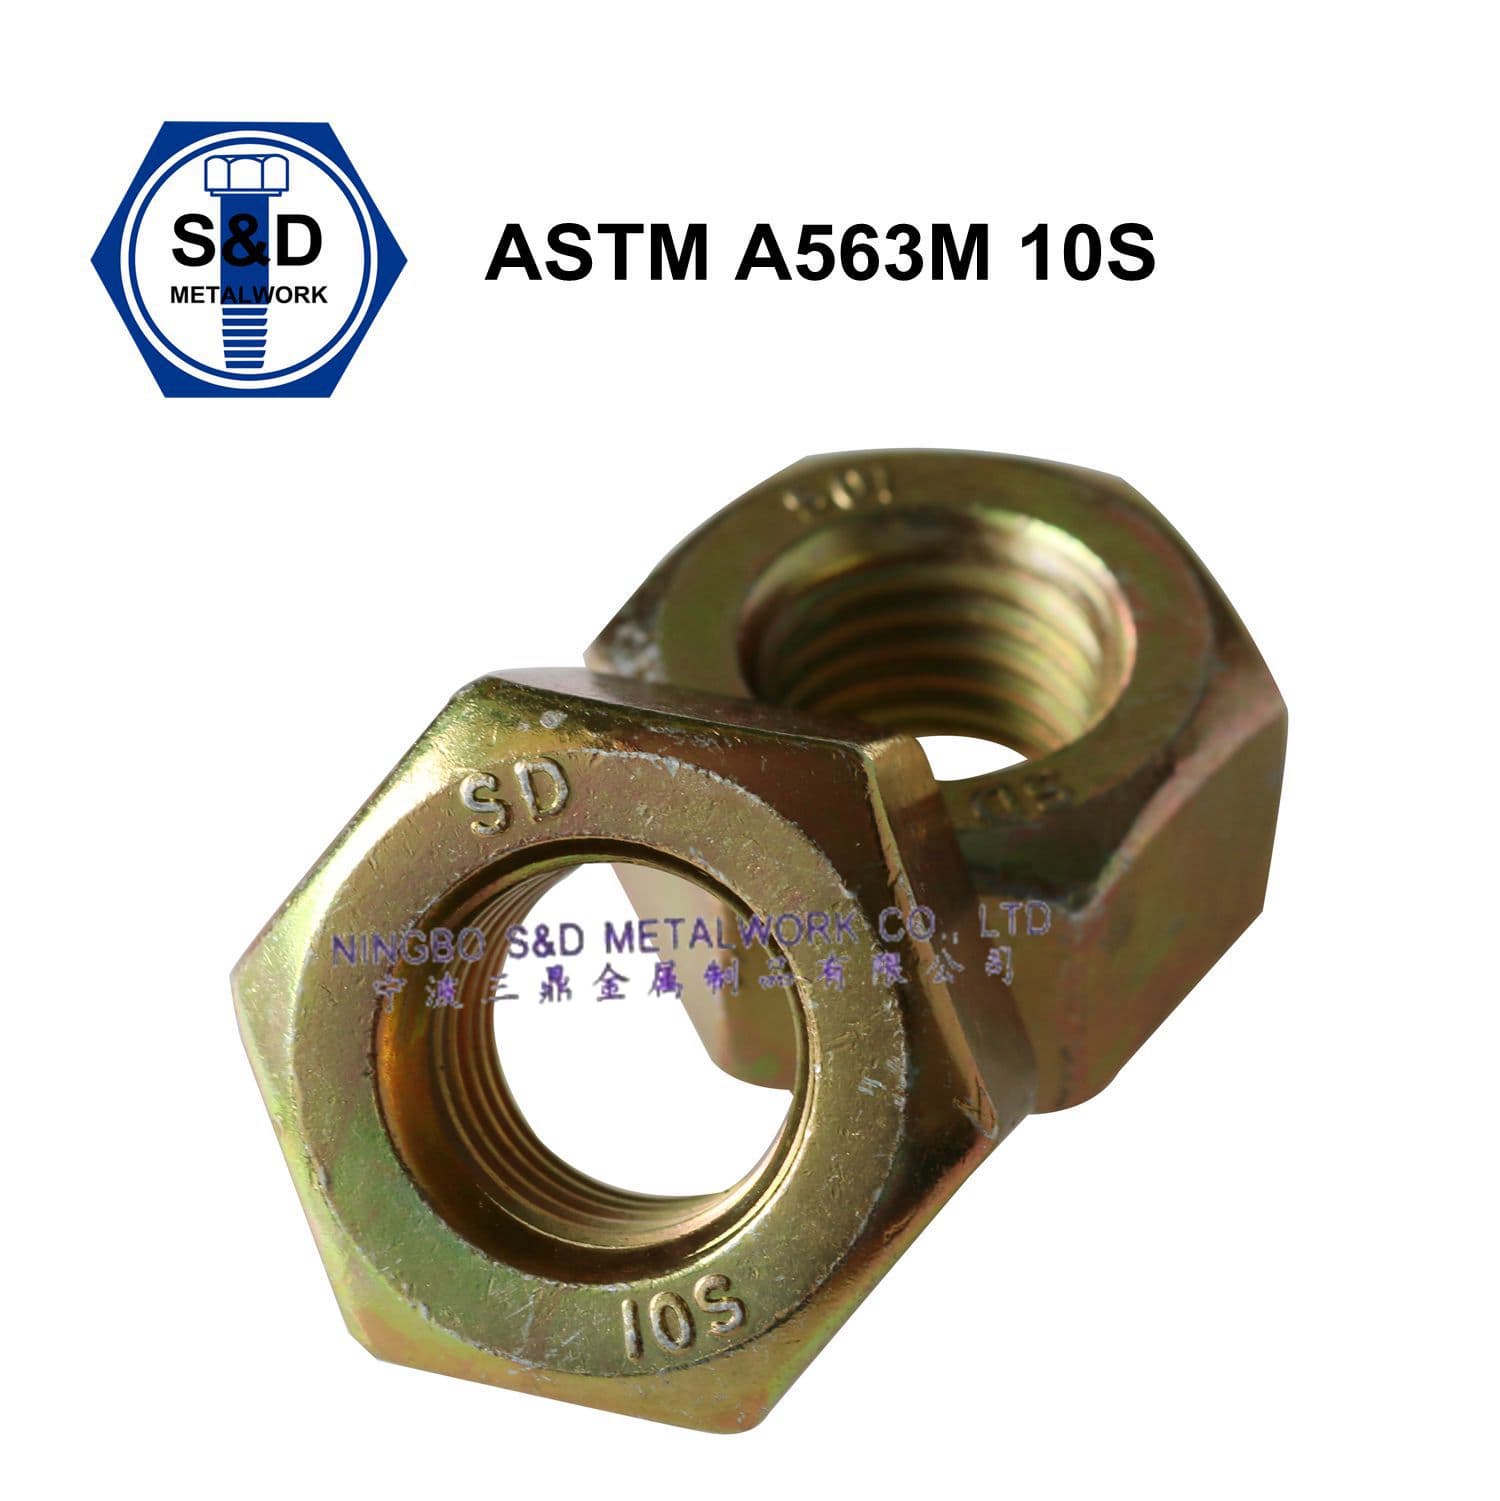 Heavy Hex Structural Nut ASTM A563M Nuts